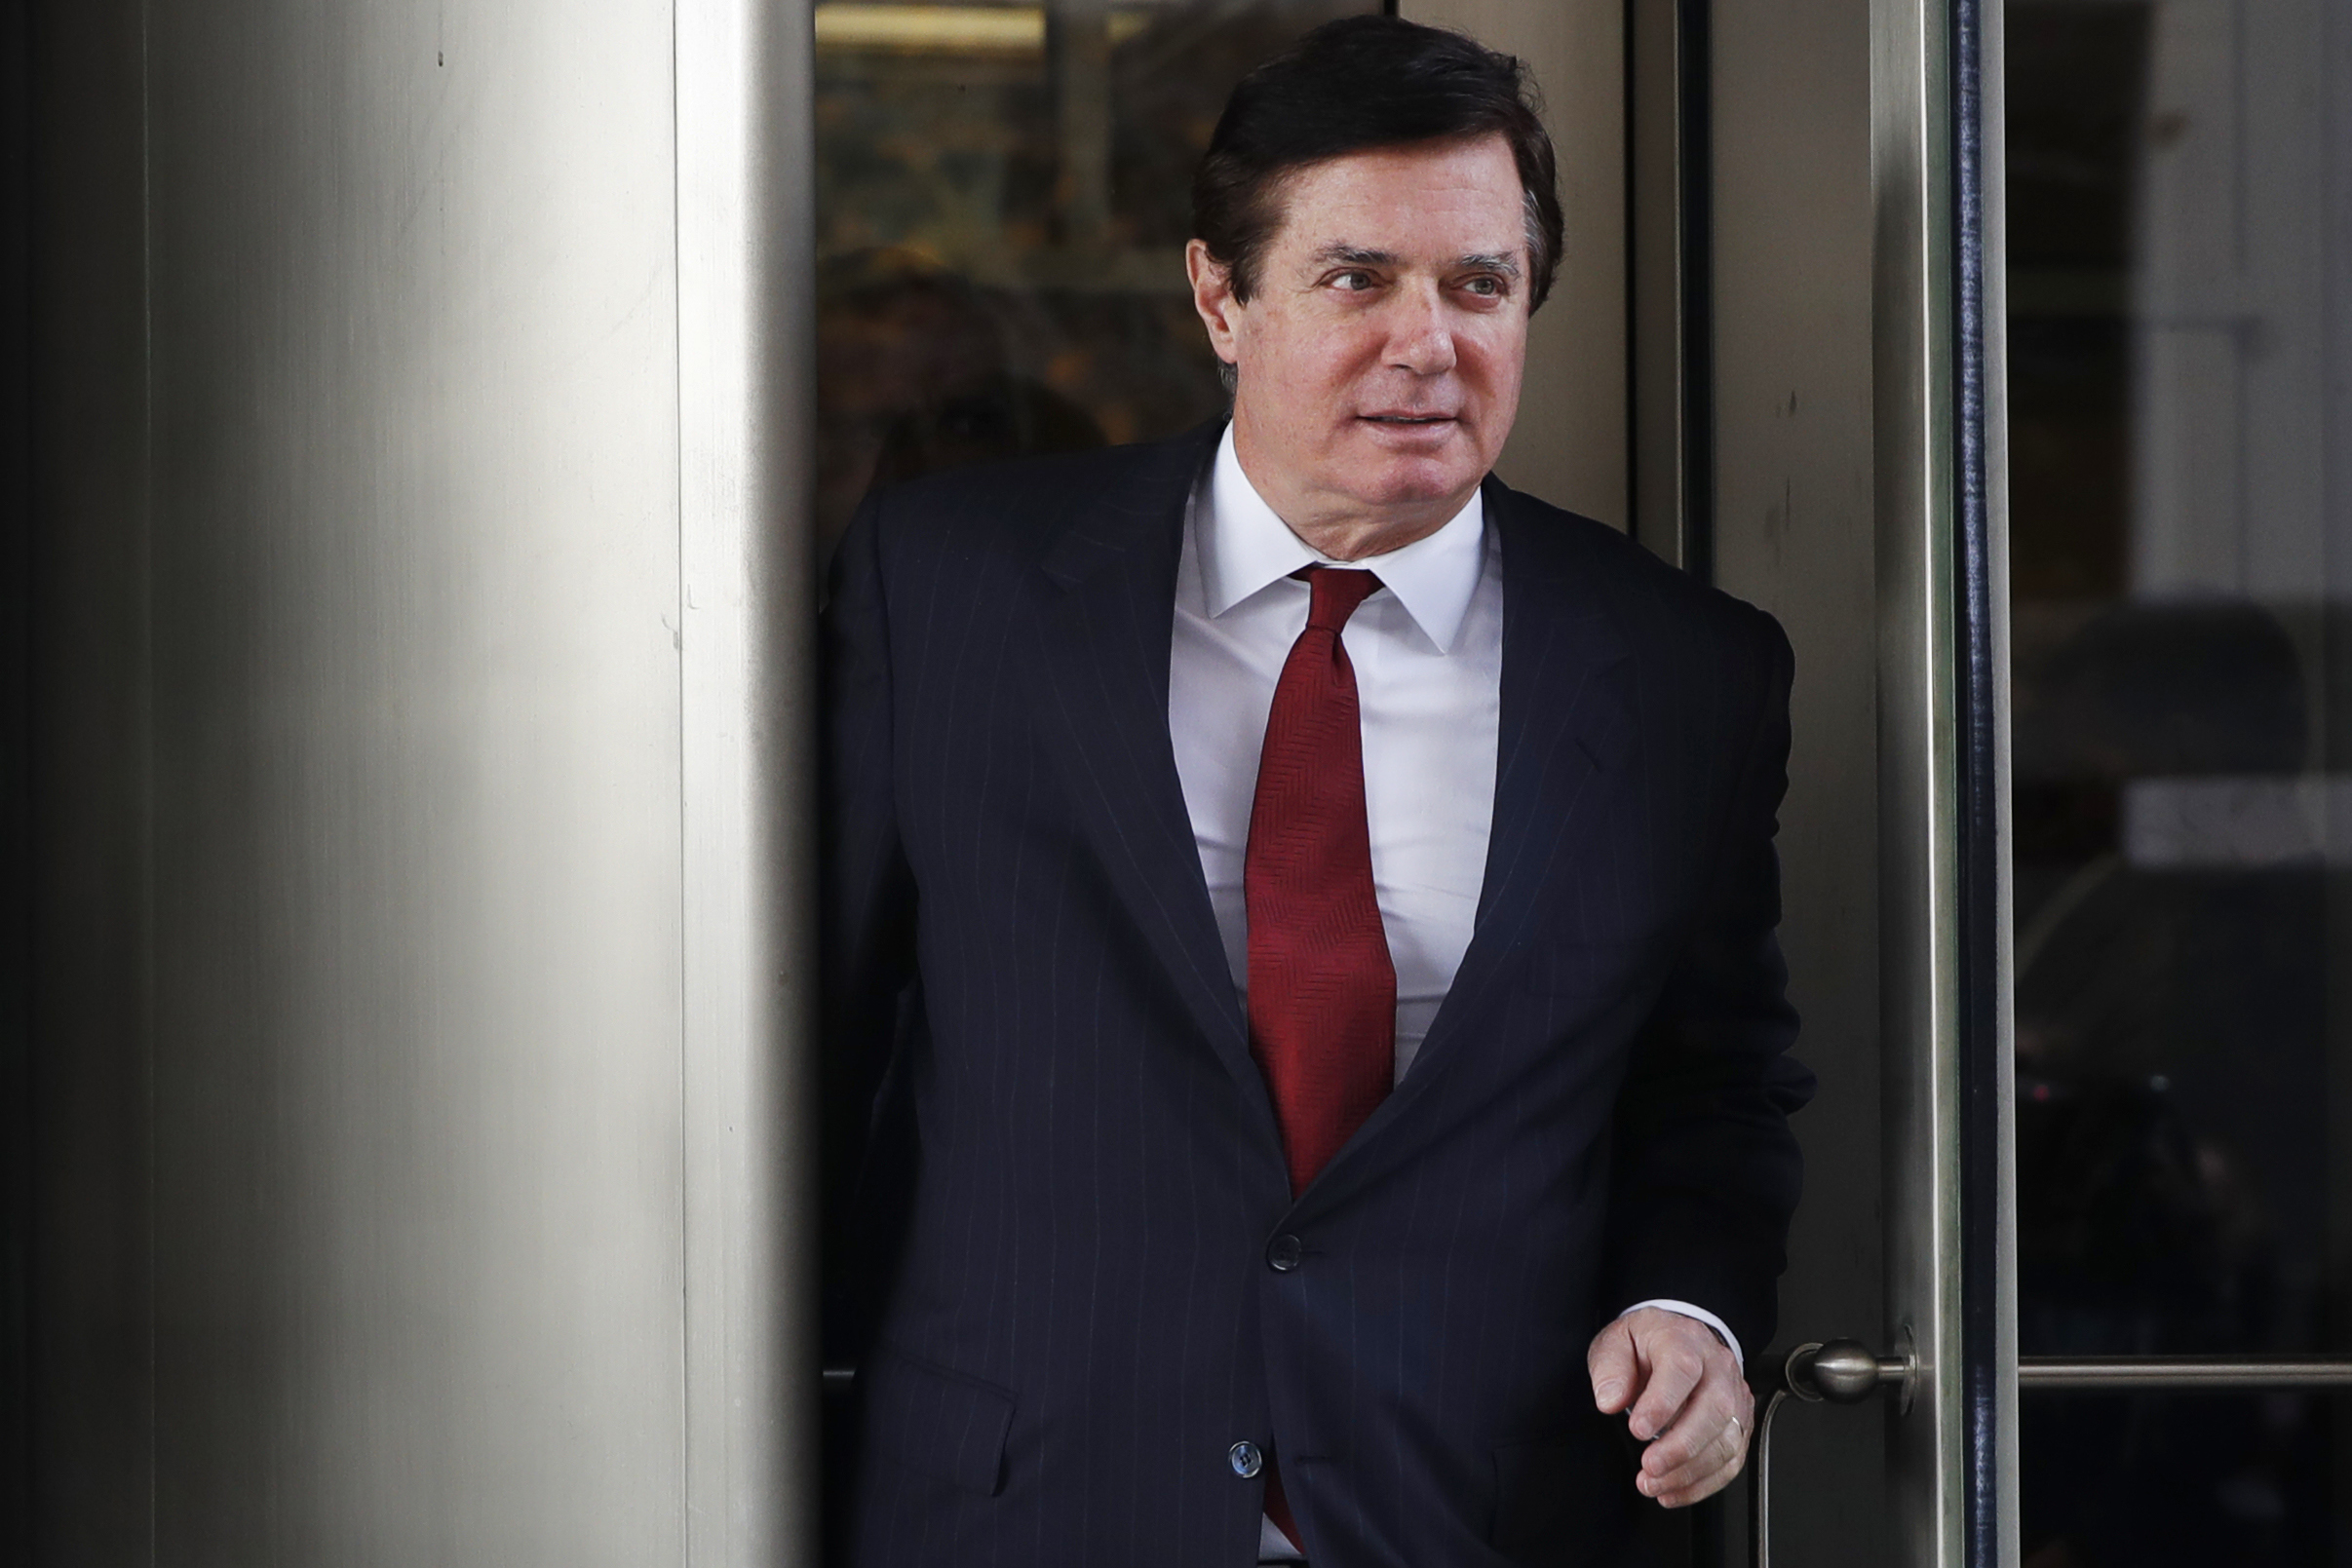 PHOTO: Paul Manafort, President Donald Trump's former campaign chairman, leaves the federal courthouse, Nov. 6, 2017, in Washington.